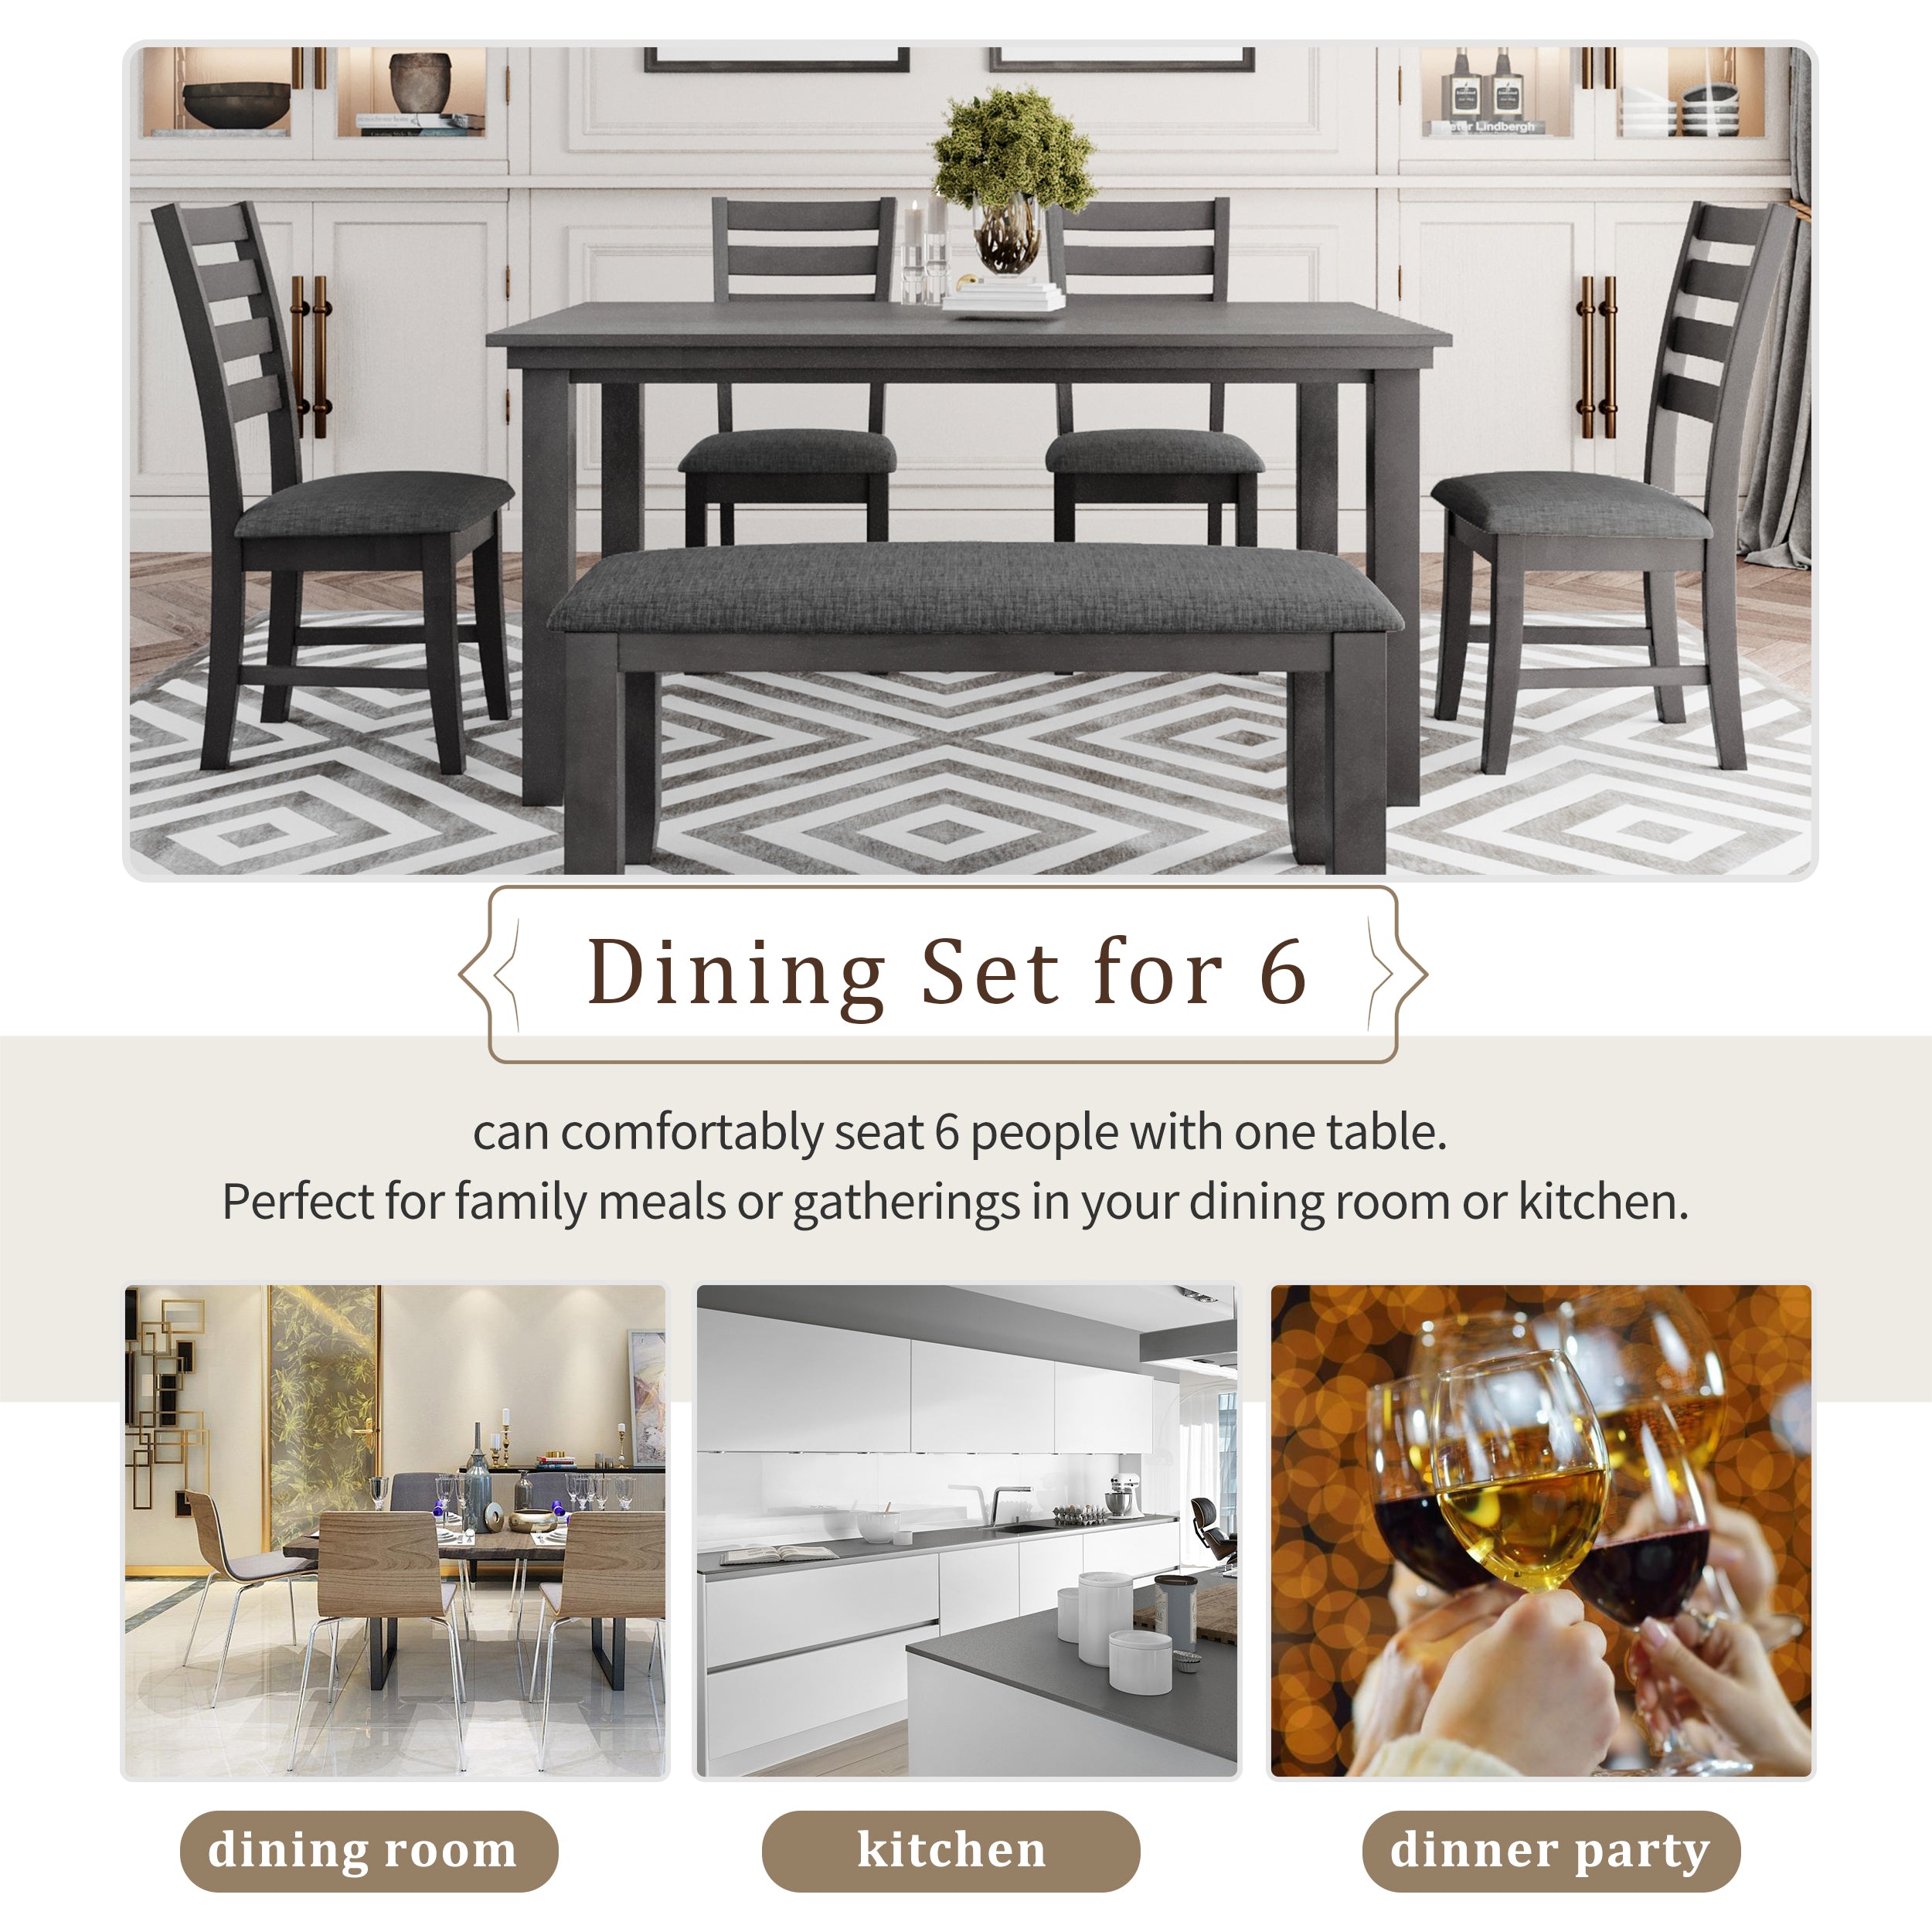 Bellemave® Dining Room Table and Chairs with Bench, Rustic Wood Dining Set Bellemave®